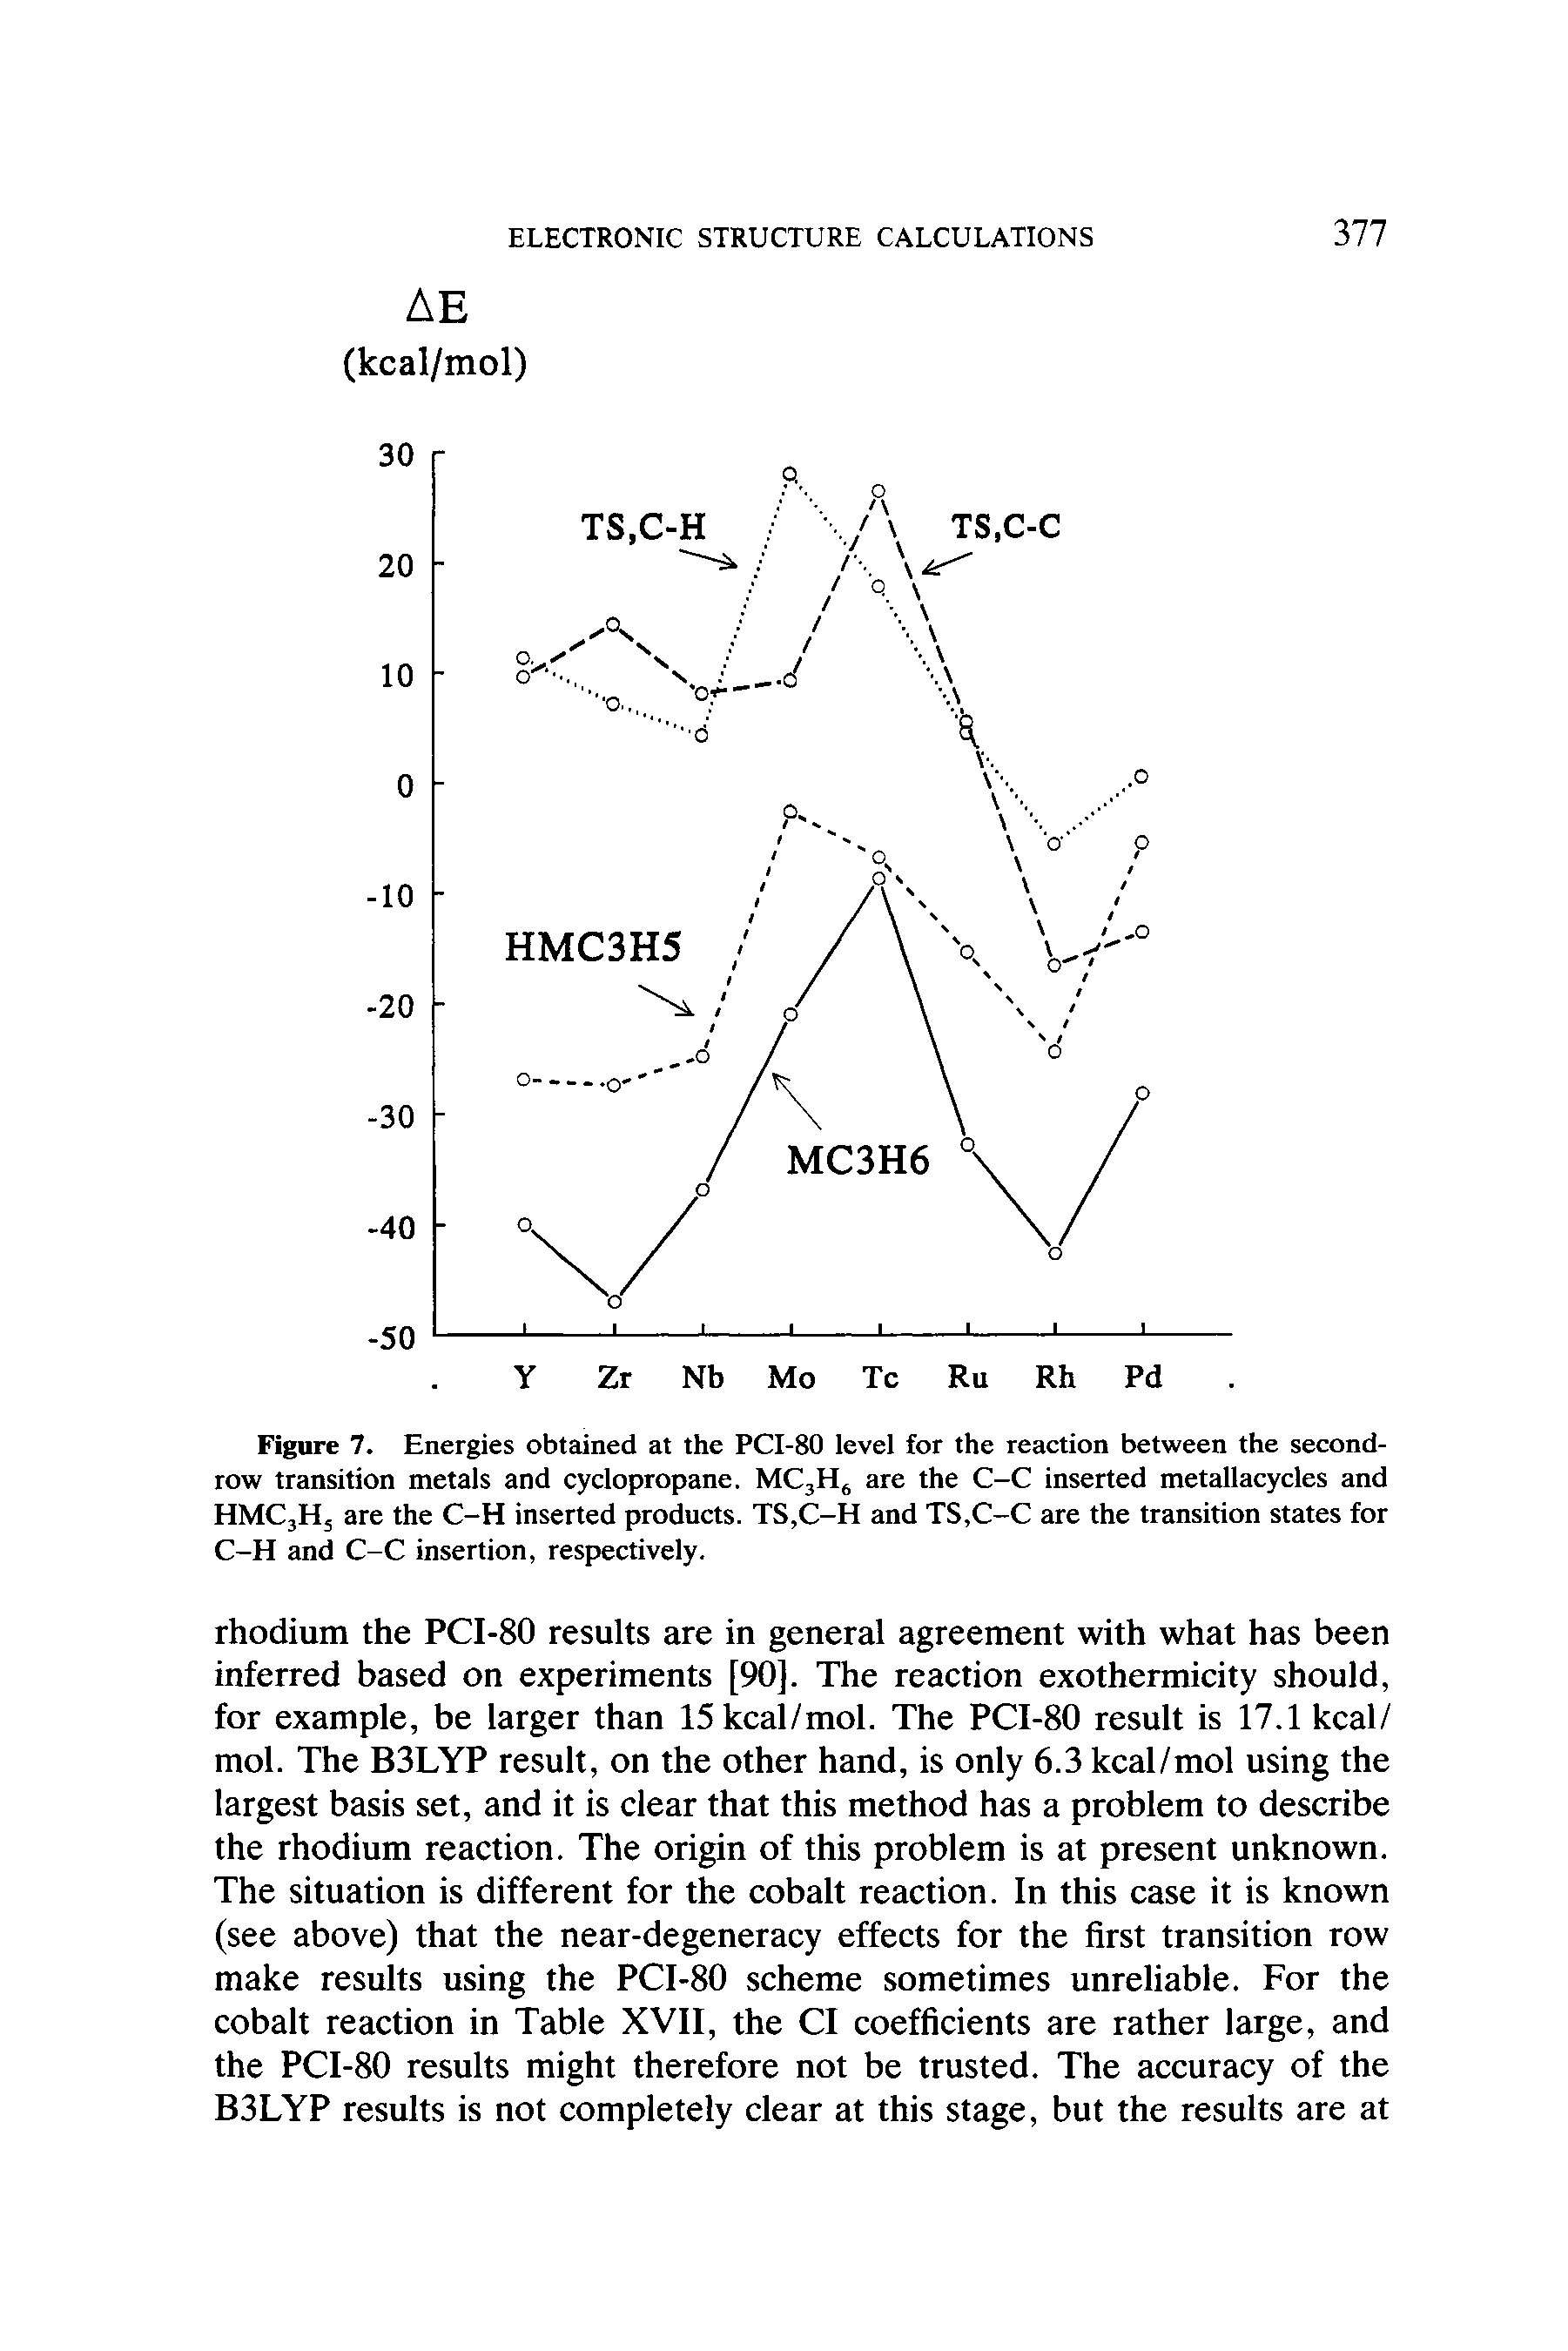 Figure 7. Energies obtained at the PCI-80 level for the reaction between the second-row transition metals and cyclopropane. MCjH are the C-C inserted metallacycles and HMC3H5 are the C-H inserted products. TS,C-H and TS,C-C are the transition states for C-H and C-C insertion, respectively.